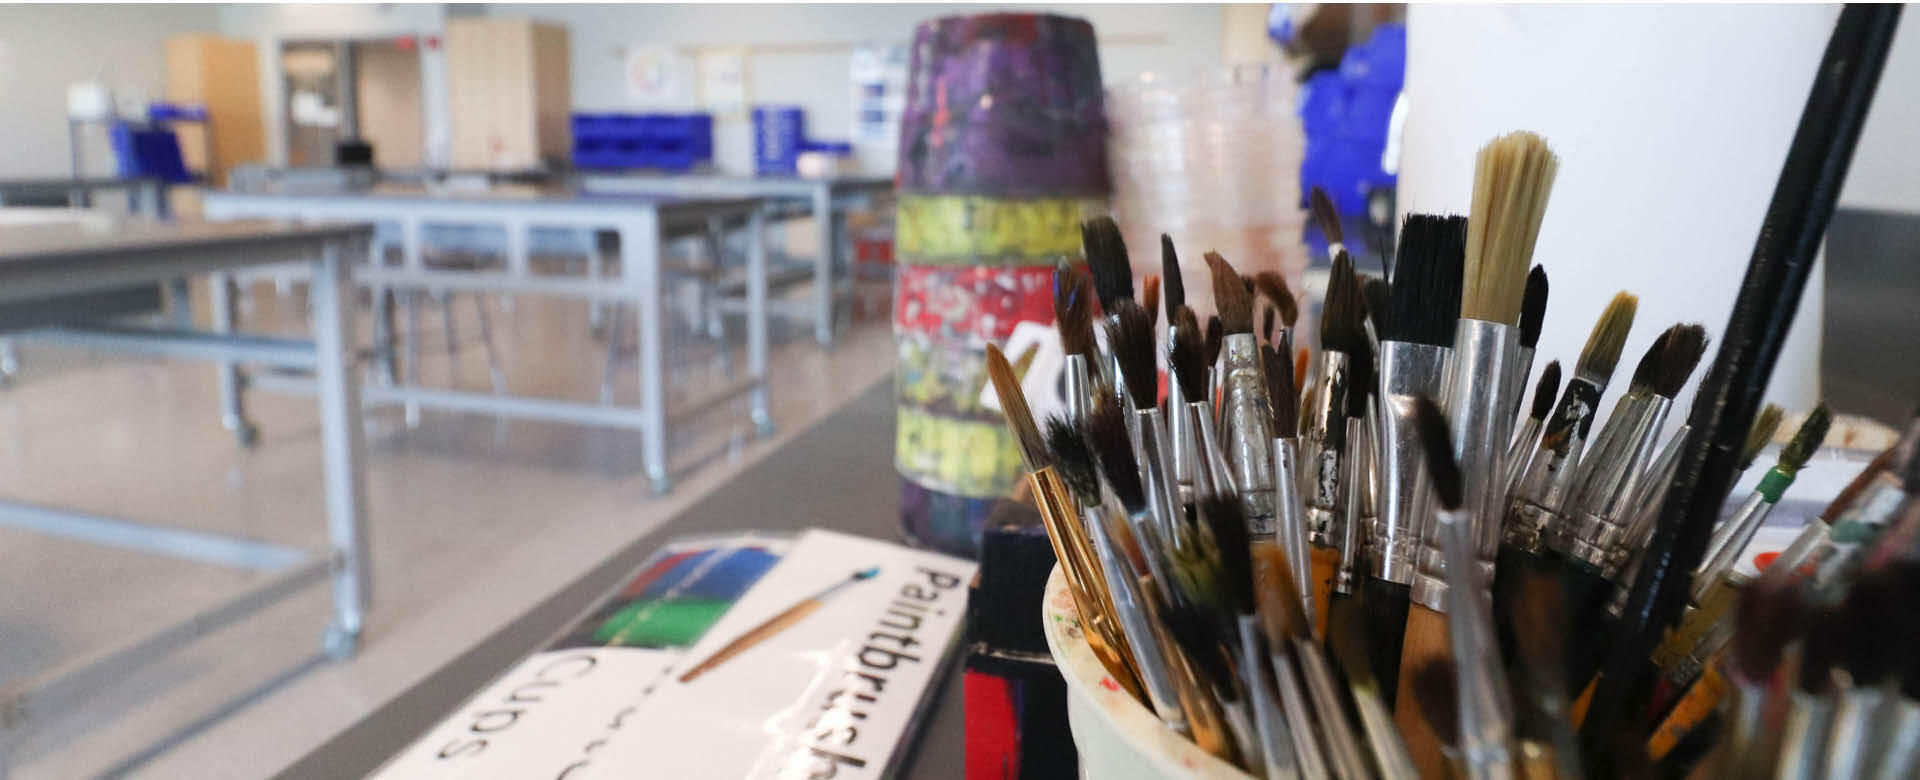 Paint brushes and art supplies on a counter.